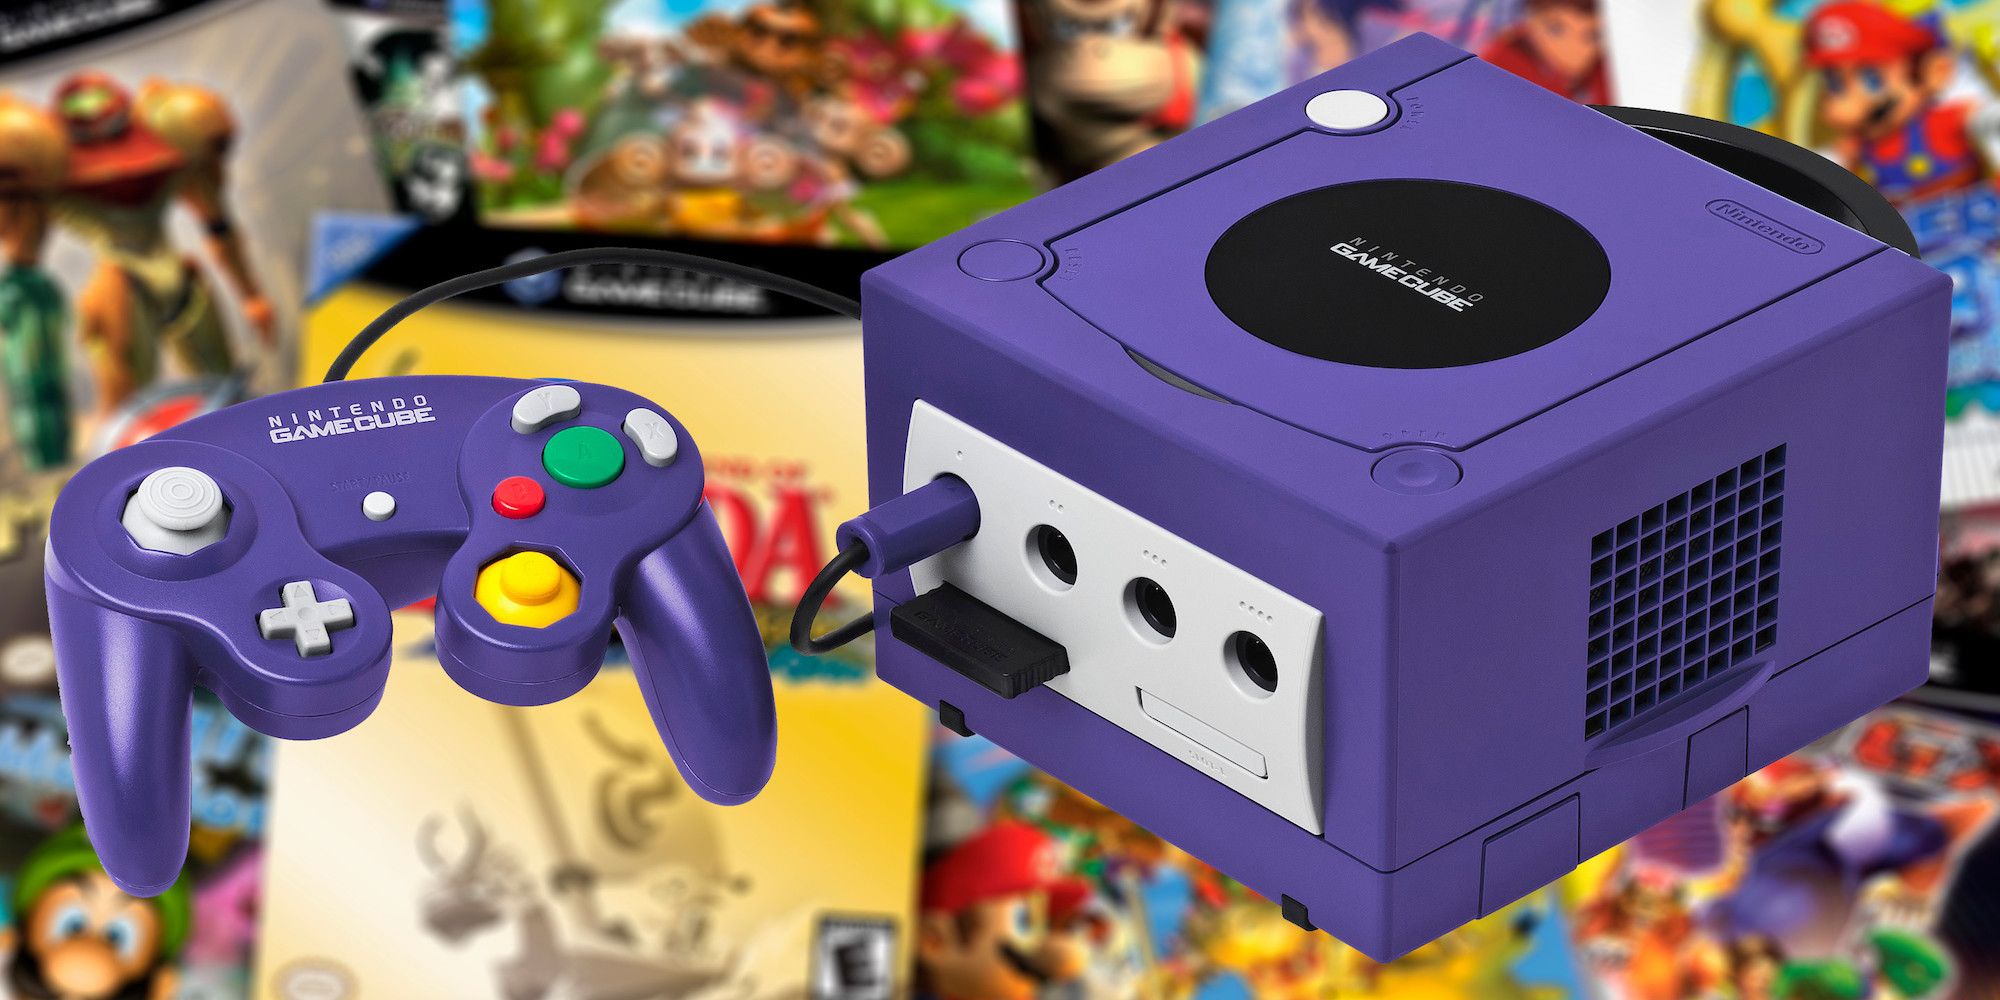 GameCube's library is full of incredible games